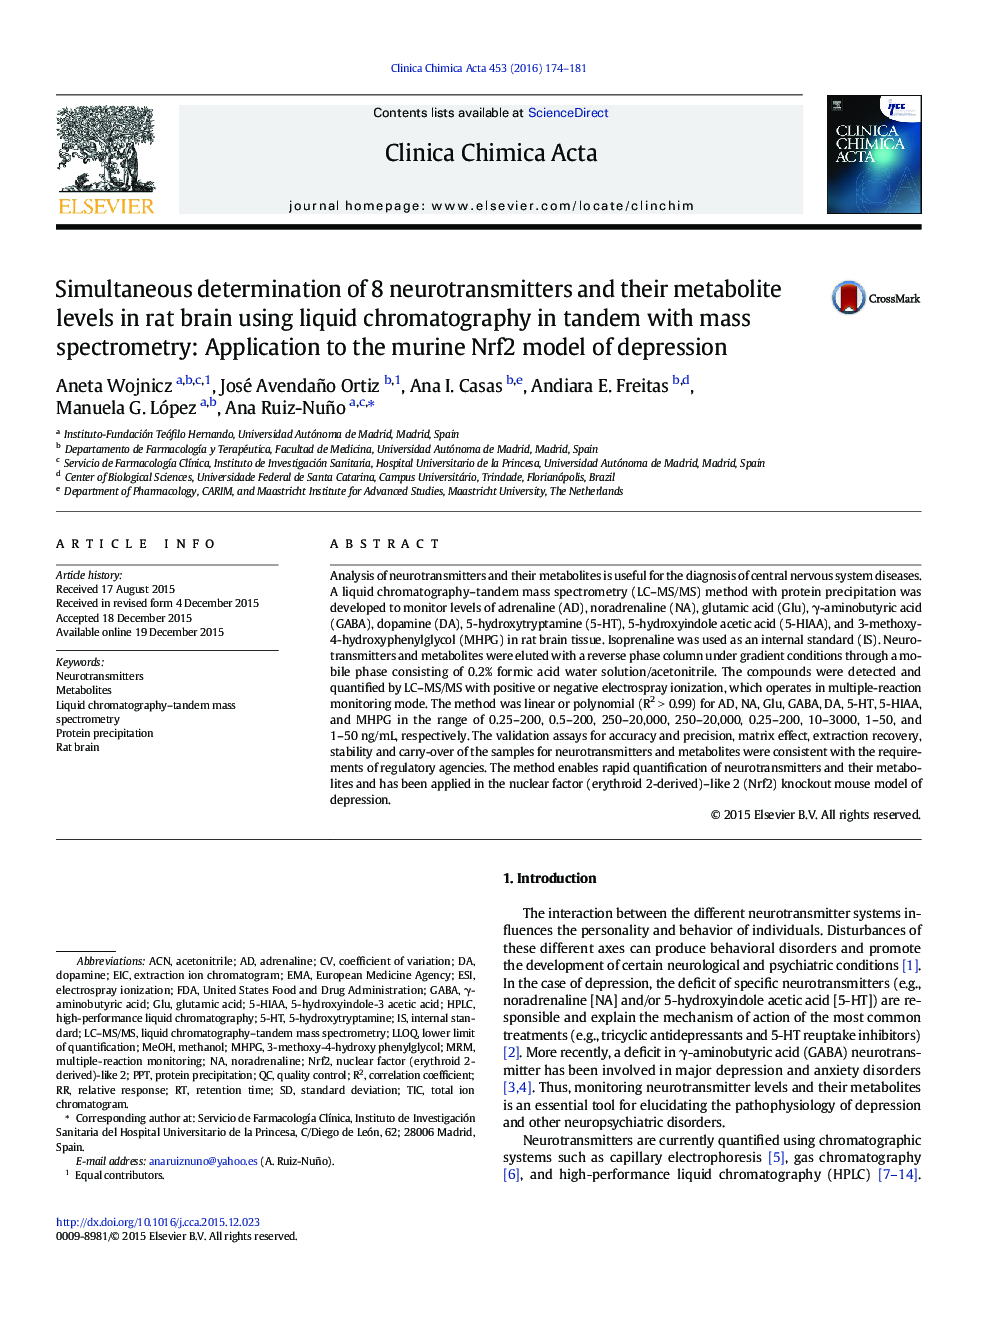 Simultaneous determination of 8 neurotransmitters and their metabolite levels in rat brain using liquid chromatography in tandem with mass spectrometry: Application to the murine Nrf2 model of depression